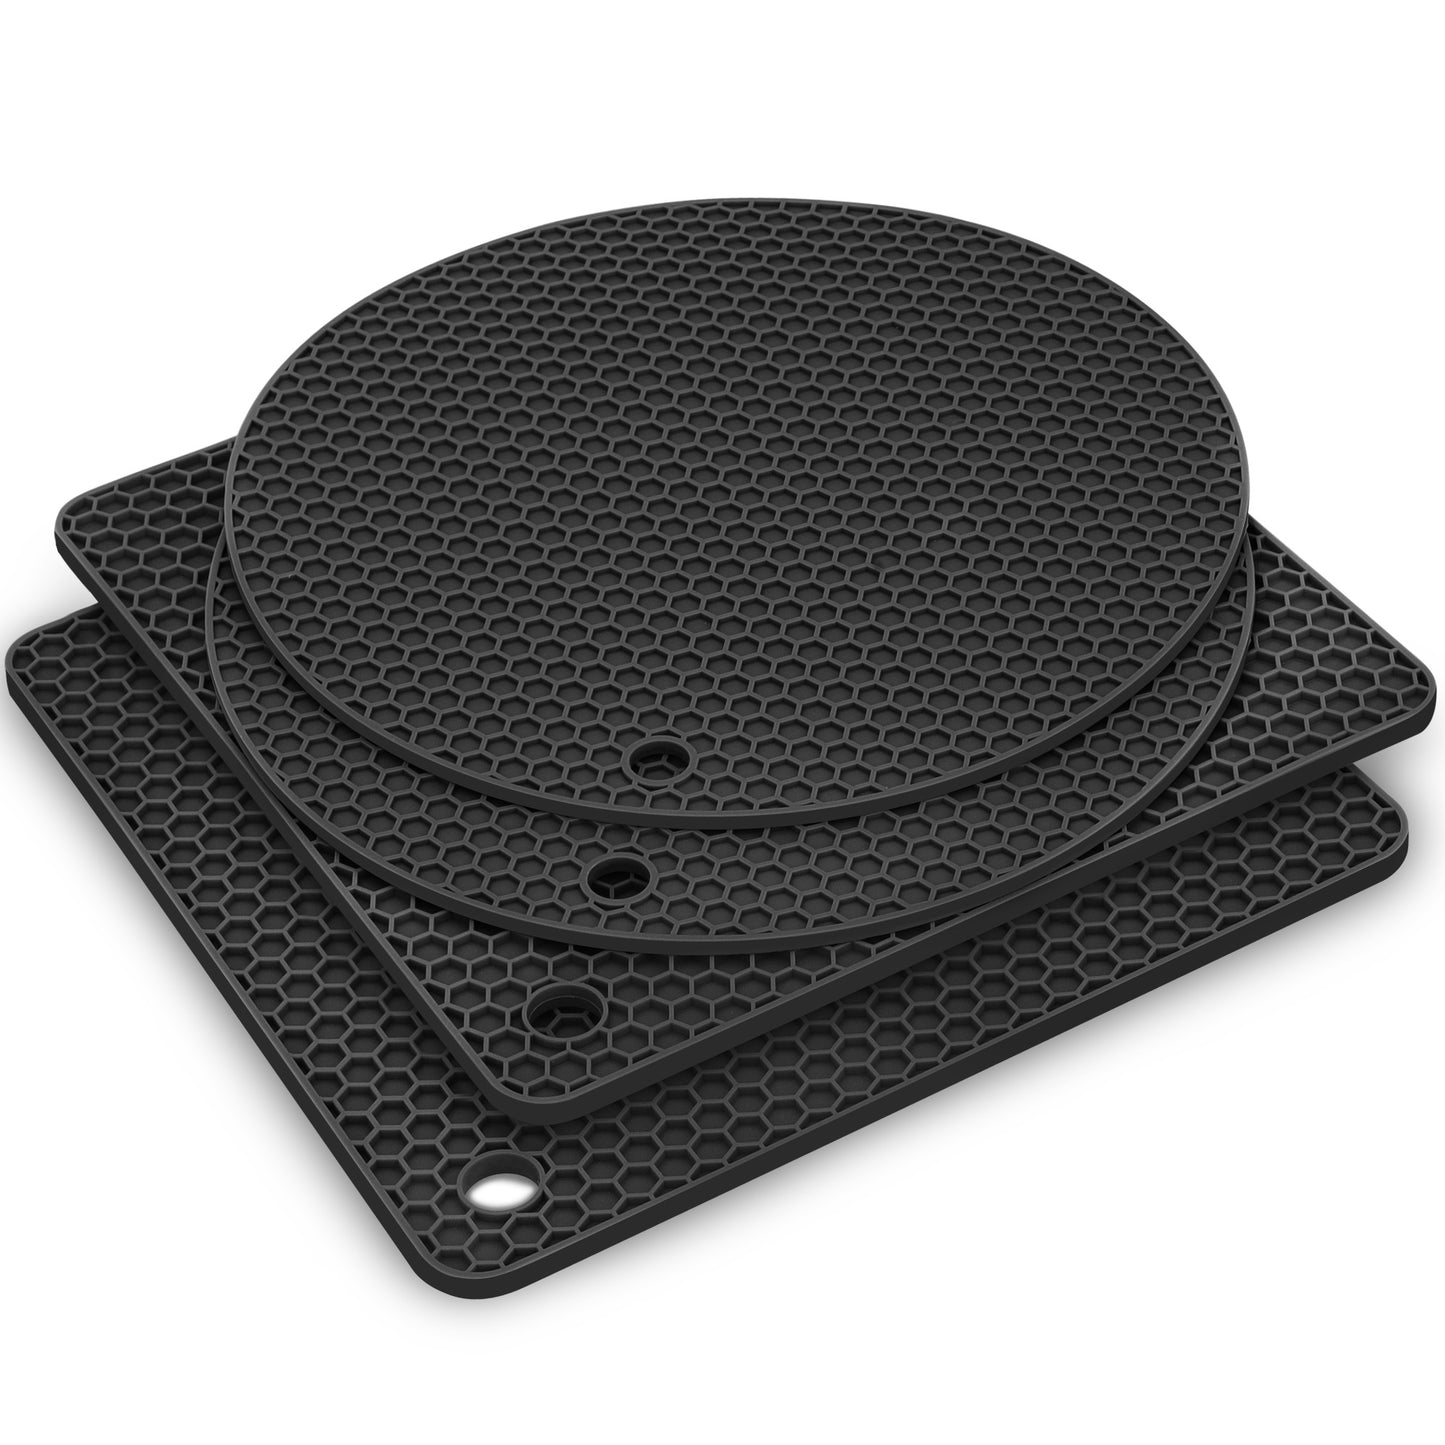 4 Pcs Silicone Trivet Mats - Heat Resistant and Non-Slip Hot Pads for Potholders, Hot Dishes, Hot Pan,Jar Opener, Spoon Holder, and Kitchen Countertops (Black)